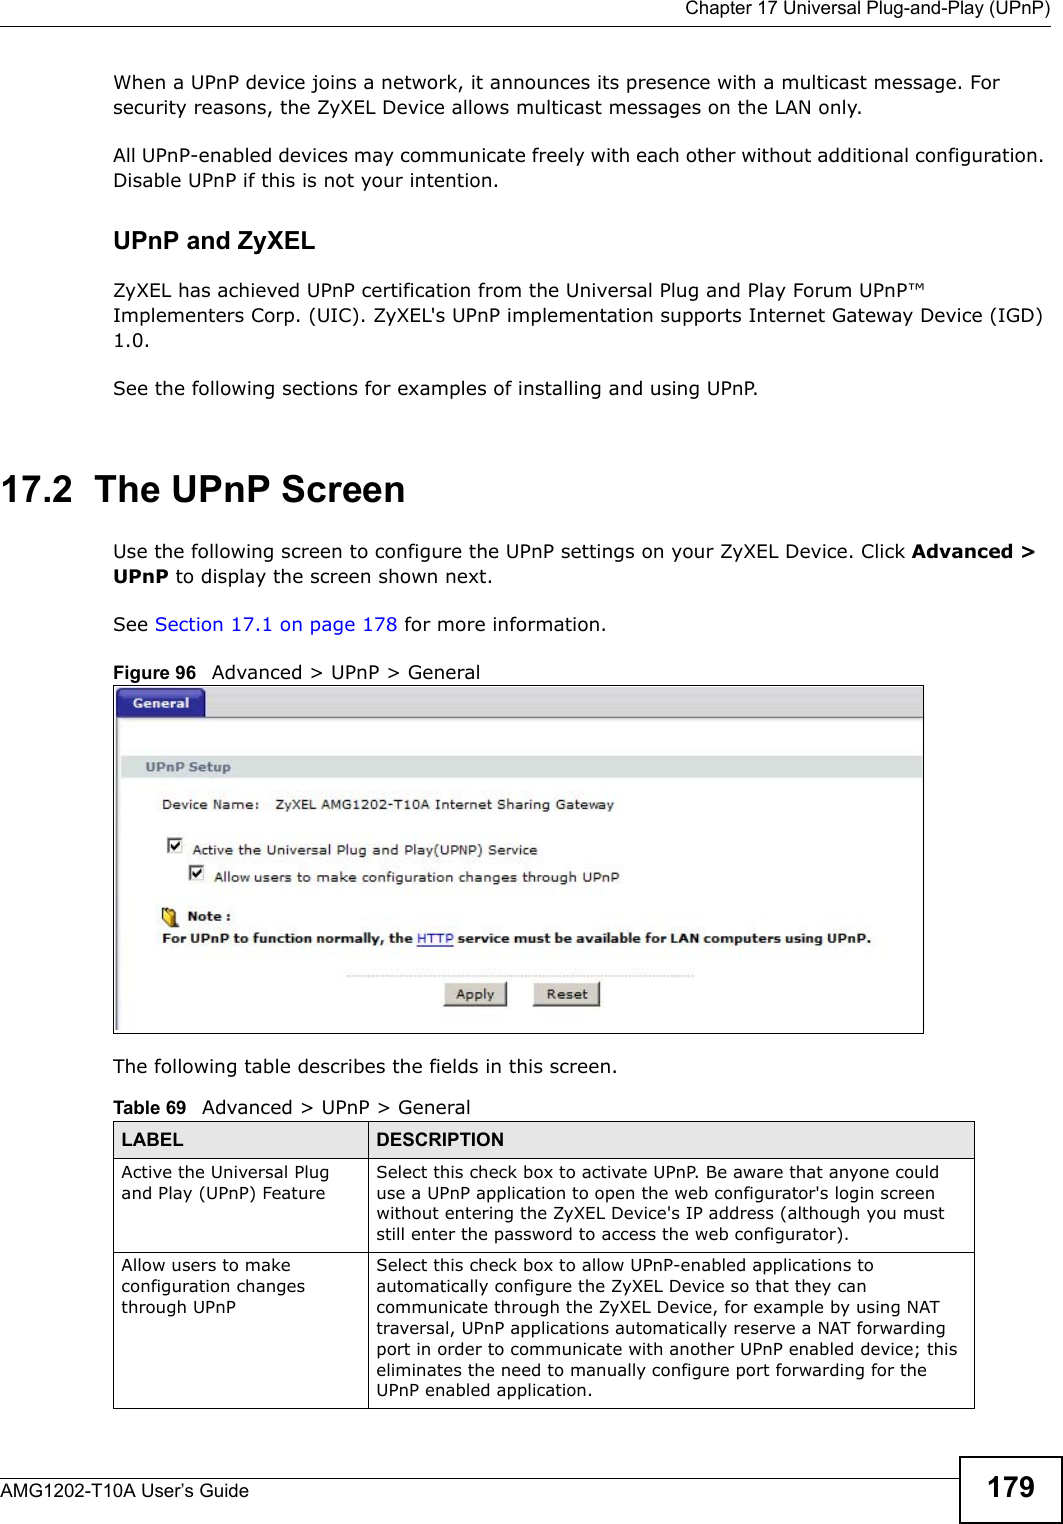  Chapter 17 Universal Plug-and-Play (UPnP)AMG1202-T10A User’s Guide 179When a UPnP device joins a network, it announces its presence with a multicast message. For security reasons, the ZyXEL Device allows multicast messages on the LAN only.All UPnP-enabled devices may communicate freely with each other without additional configuration. Disable UPnP if this is not your intention. UPnP and ZyXELZyXEL has achieved UPnP certification from the Universal Plug and Play Forum UPnP™ Implementers Corp. (UIC). ZyXEL&apos;s UPnP implementation supports Internet Gateway Device (IGD) 1.0. See the following sections for examples of installing and using UPnP.17.2  The UPnP ScreenUse the following screen to configure the UPnP settings on your ZyXEL Device. Click Advanced &gt; UPnP to display the screen shown next.See Section 17.1 on page 178 for more information. Figure 96   Advanced &gt; UPnP &gt; GeneralThe following table describes the fields in this screen. Table 69   Advanced &gt; UPnP &gt; GeneralLABEL DESCRIPTIONActive the Universal Plug and Play (UPnP) FeatureSelect this check box to activate UPnP. Be aware that anyone could use a UPnP application to open the web configurator&apos;s login screen without entering the ZyXEL Device&apos;s IP address (although you must still enter the password to access the web configurator).Allow users to make configuration changes through UPnPSelect this check box to allow UPnP-enabled applications to automatically configure the ZyXEL Device so that they can communicate through the ZyXEL Device, for example by using NAT traversal, UPnP applications automatically reserve a NAT forwarding port in order to communicate with another UPnP enabled device; this eliminates the need to manually configure port forwarding for the UPnP enabled application. 